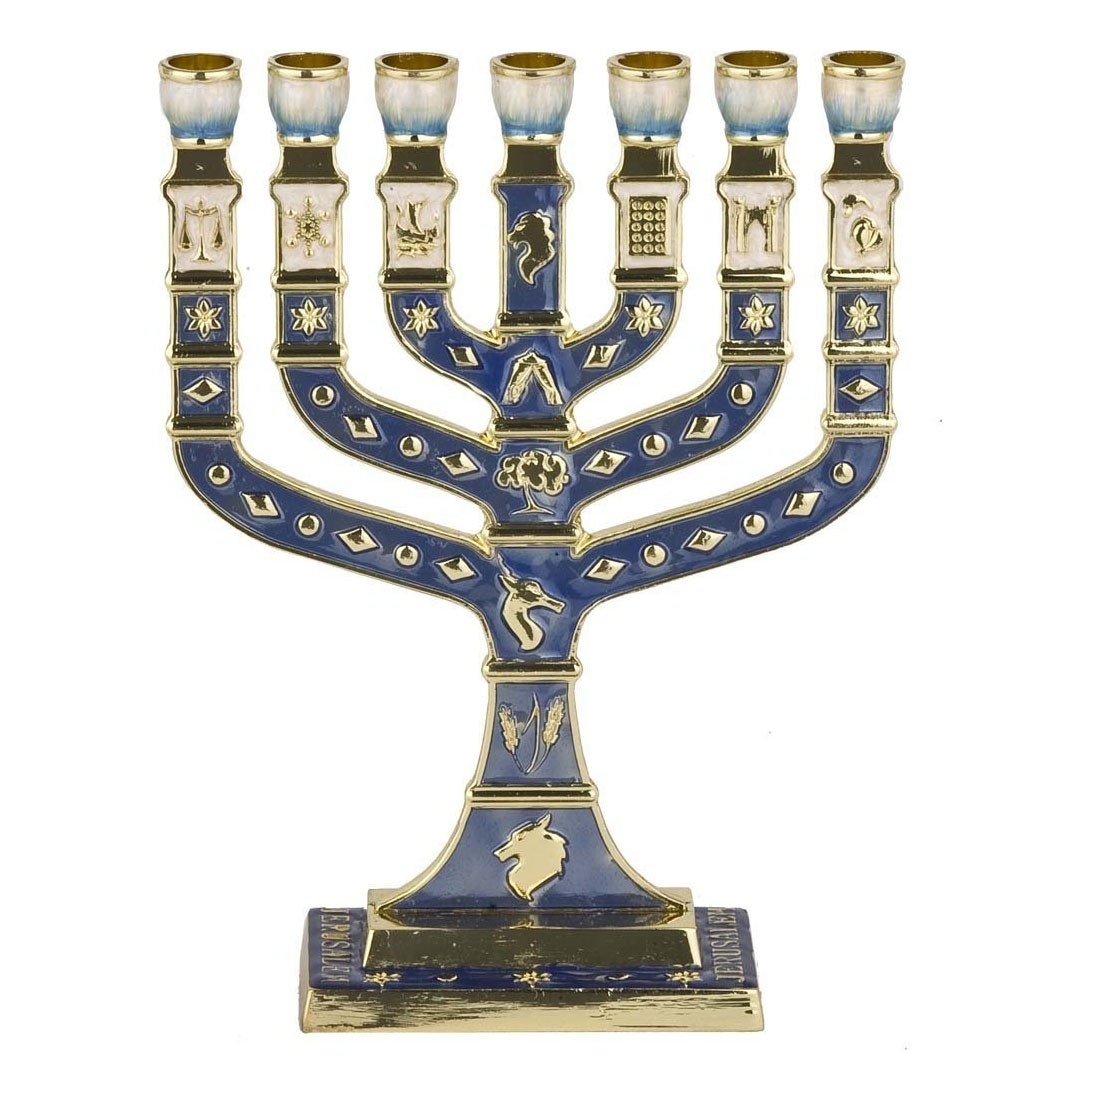 Miniature Gold Tone Blue Enameled Knesset-Style 7-Branched Menorah with 12 Tribe Symbols - 1